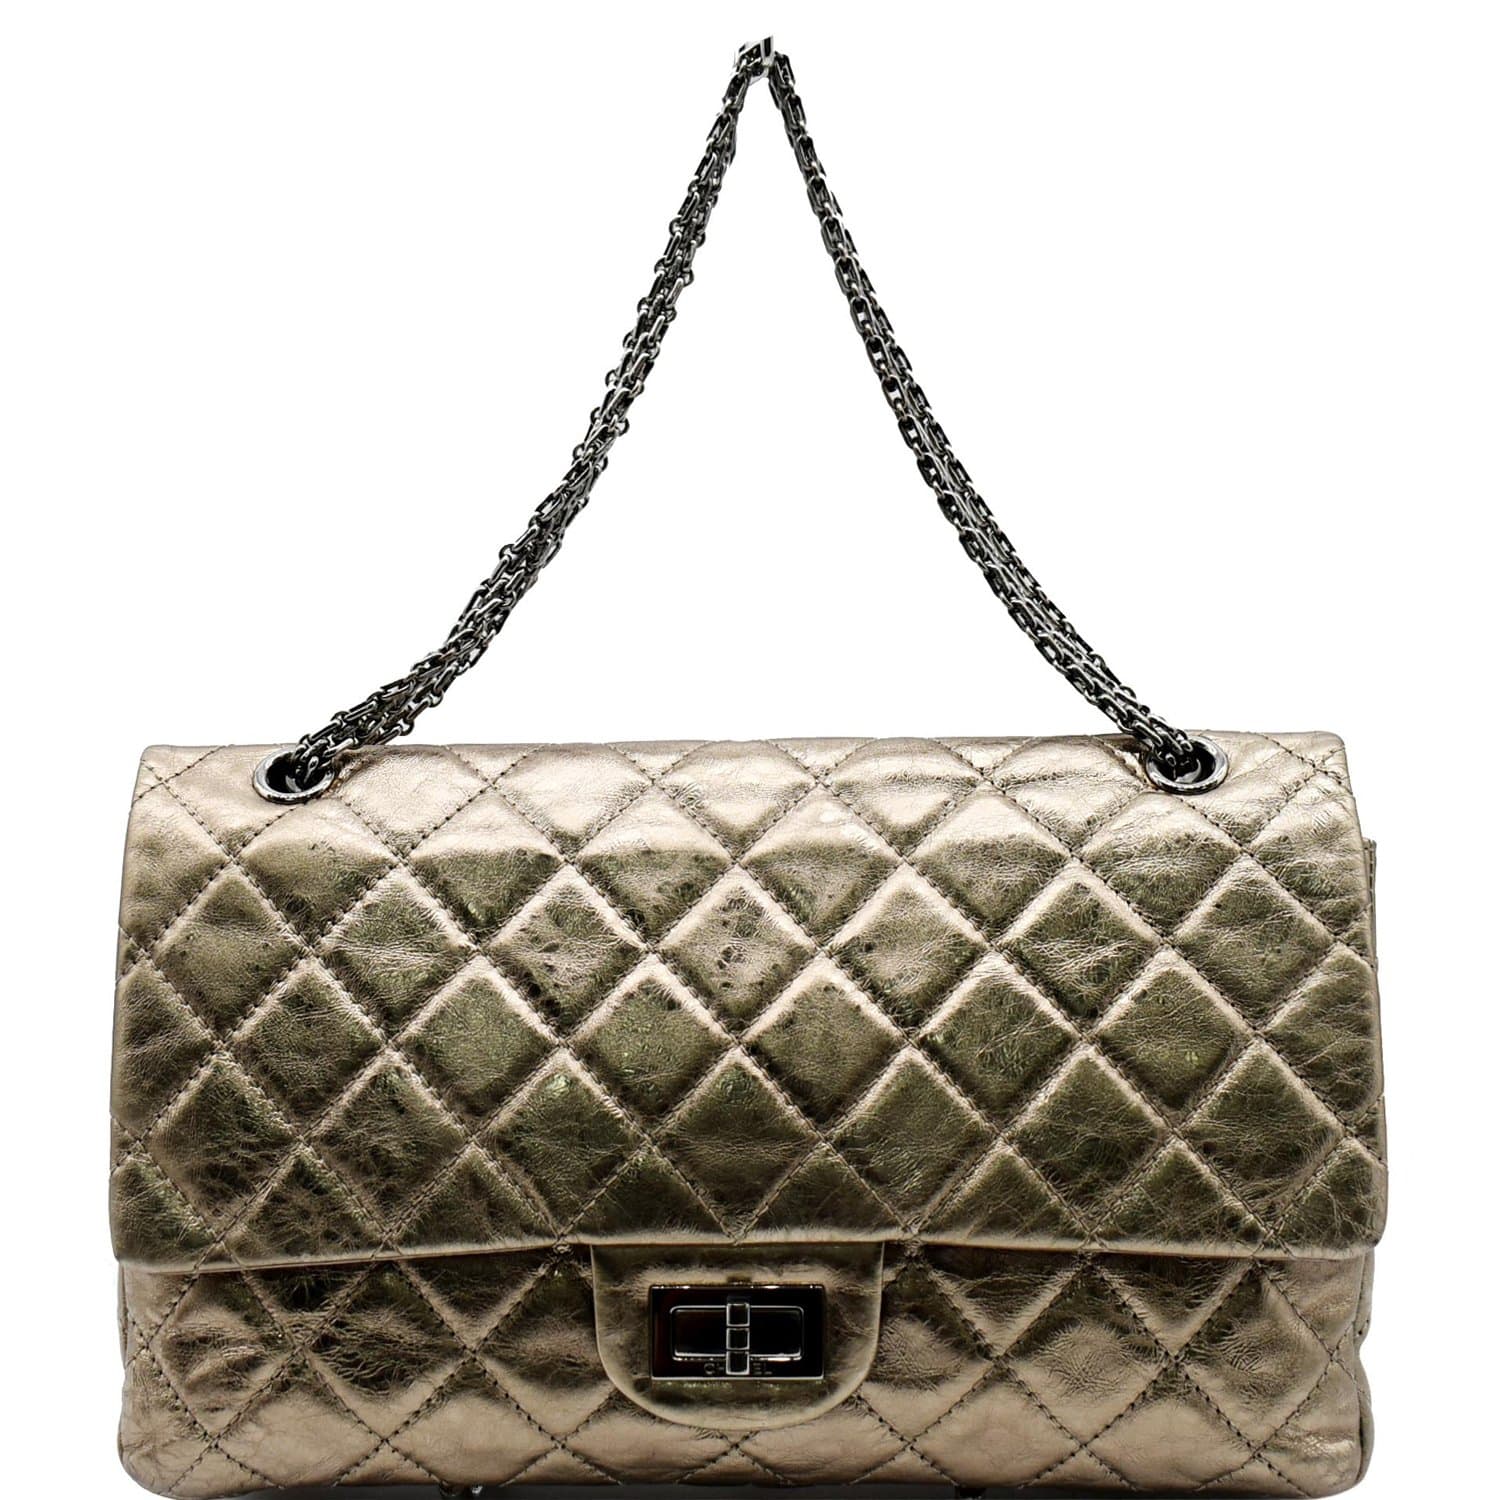 CHANEL Gold Metallic 2.55 225 Reissue Flap Bag – Fashion Reloved